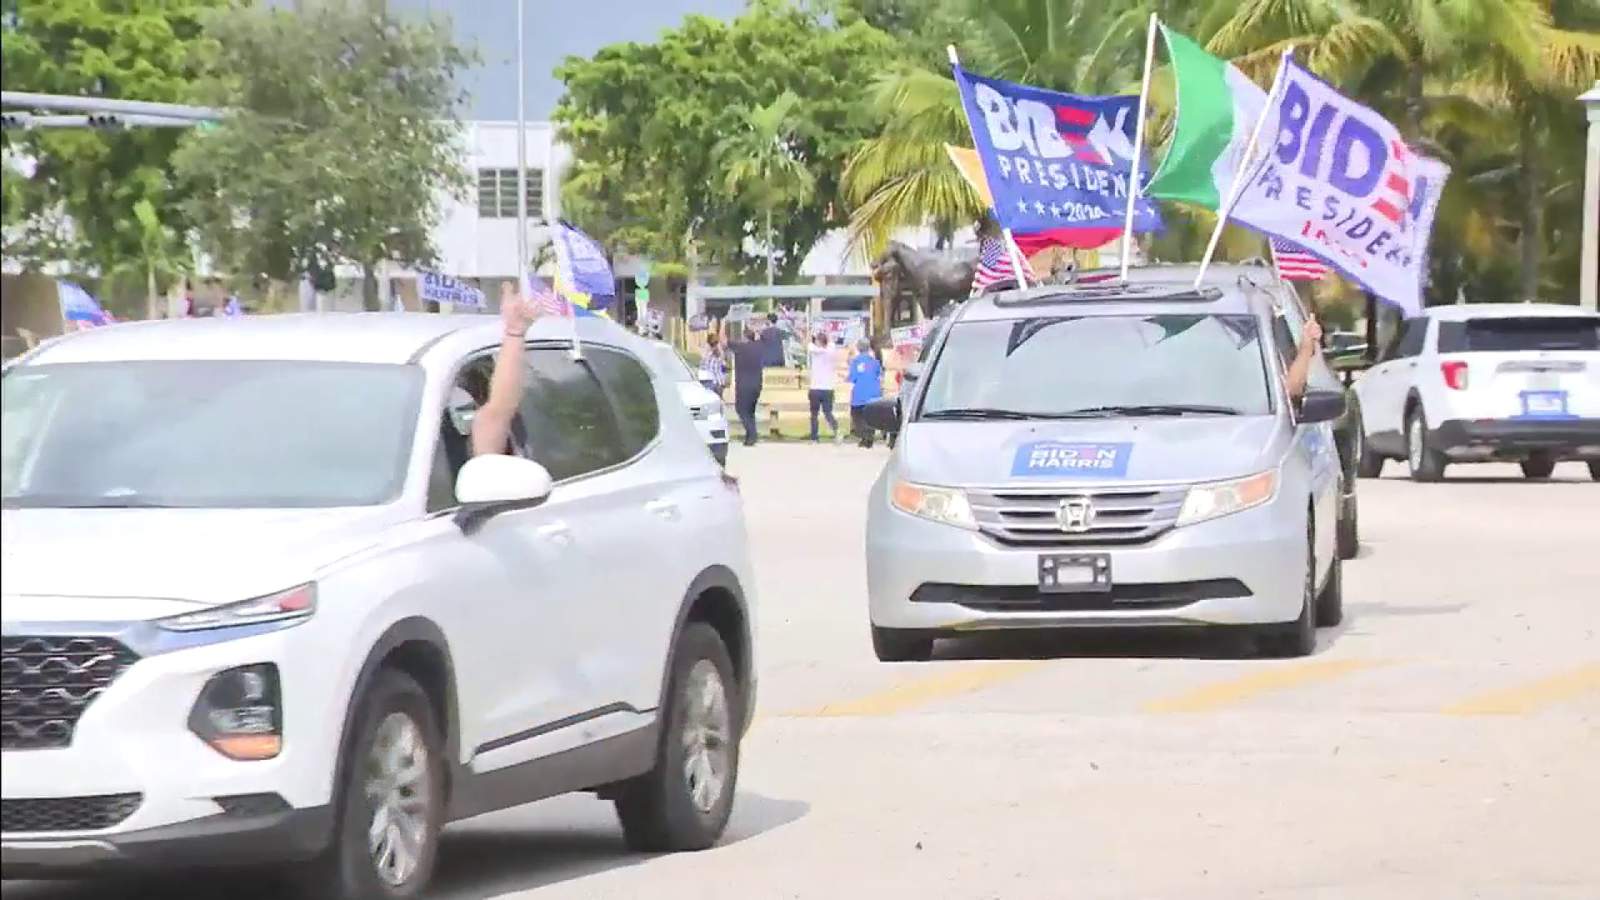 Biden-Harris supporters from Miami spend Sunday at Tropical Park